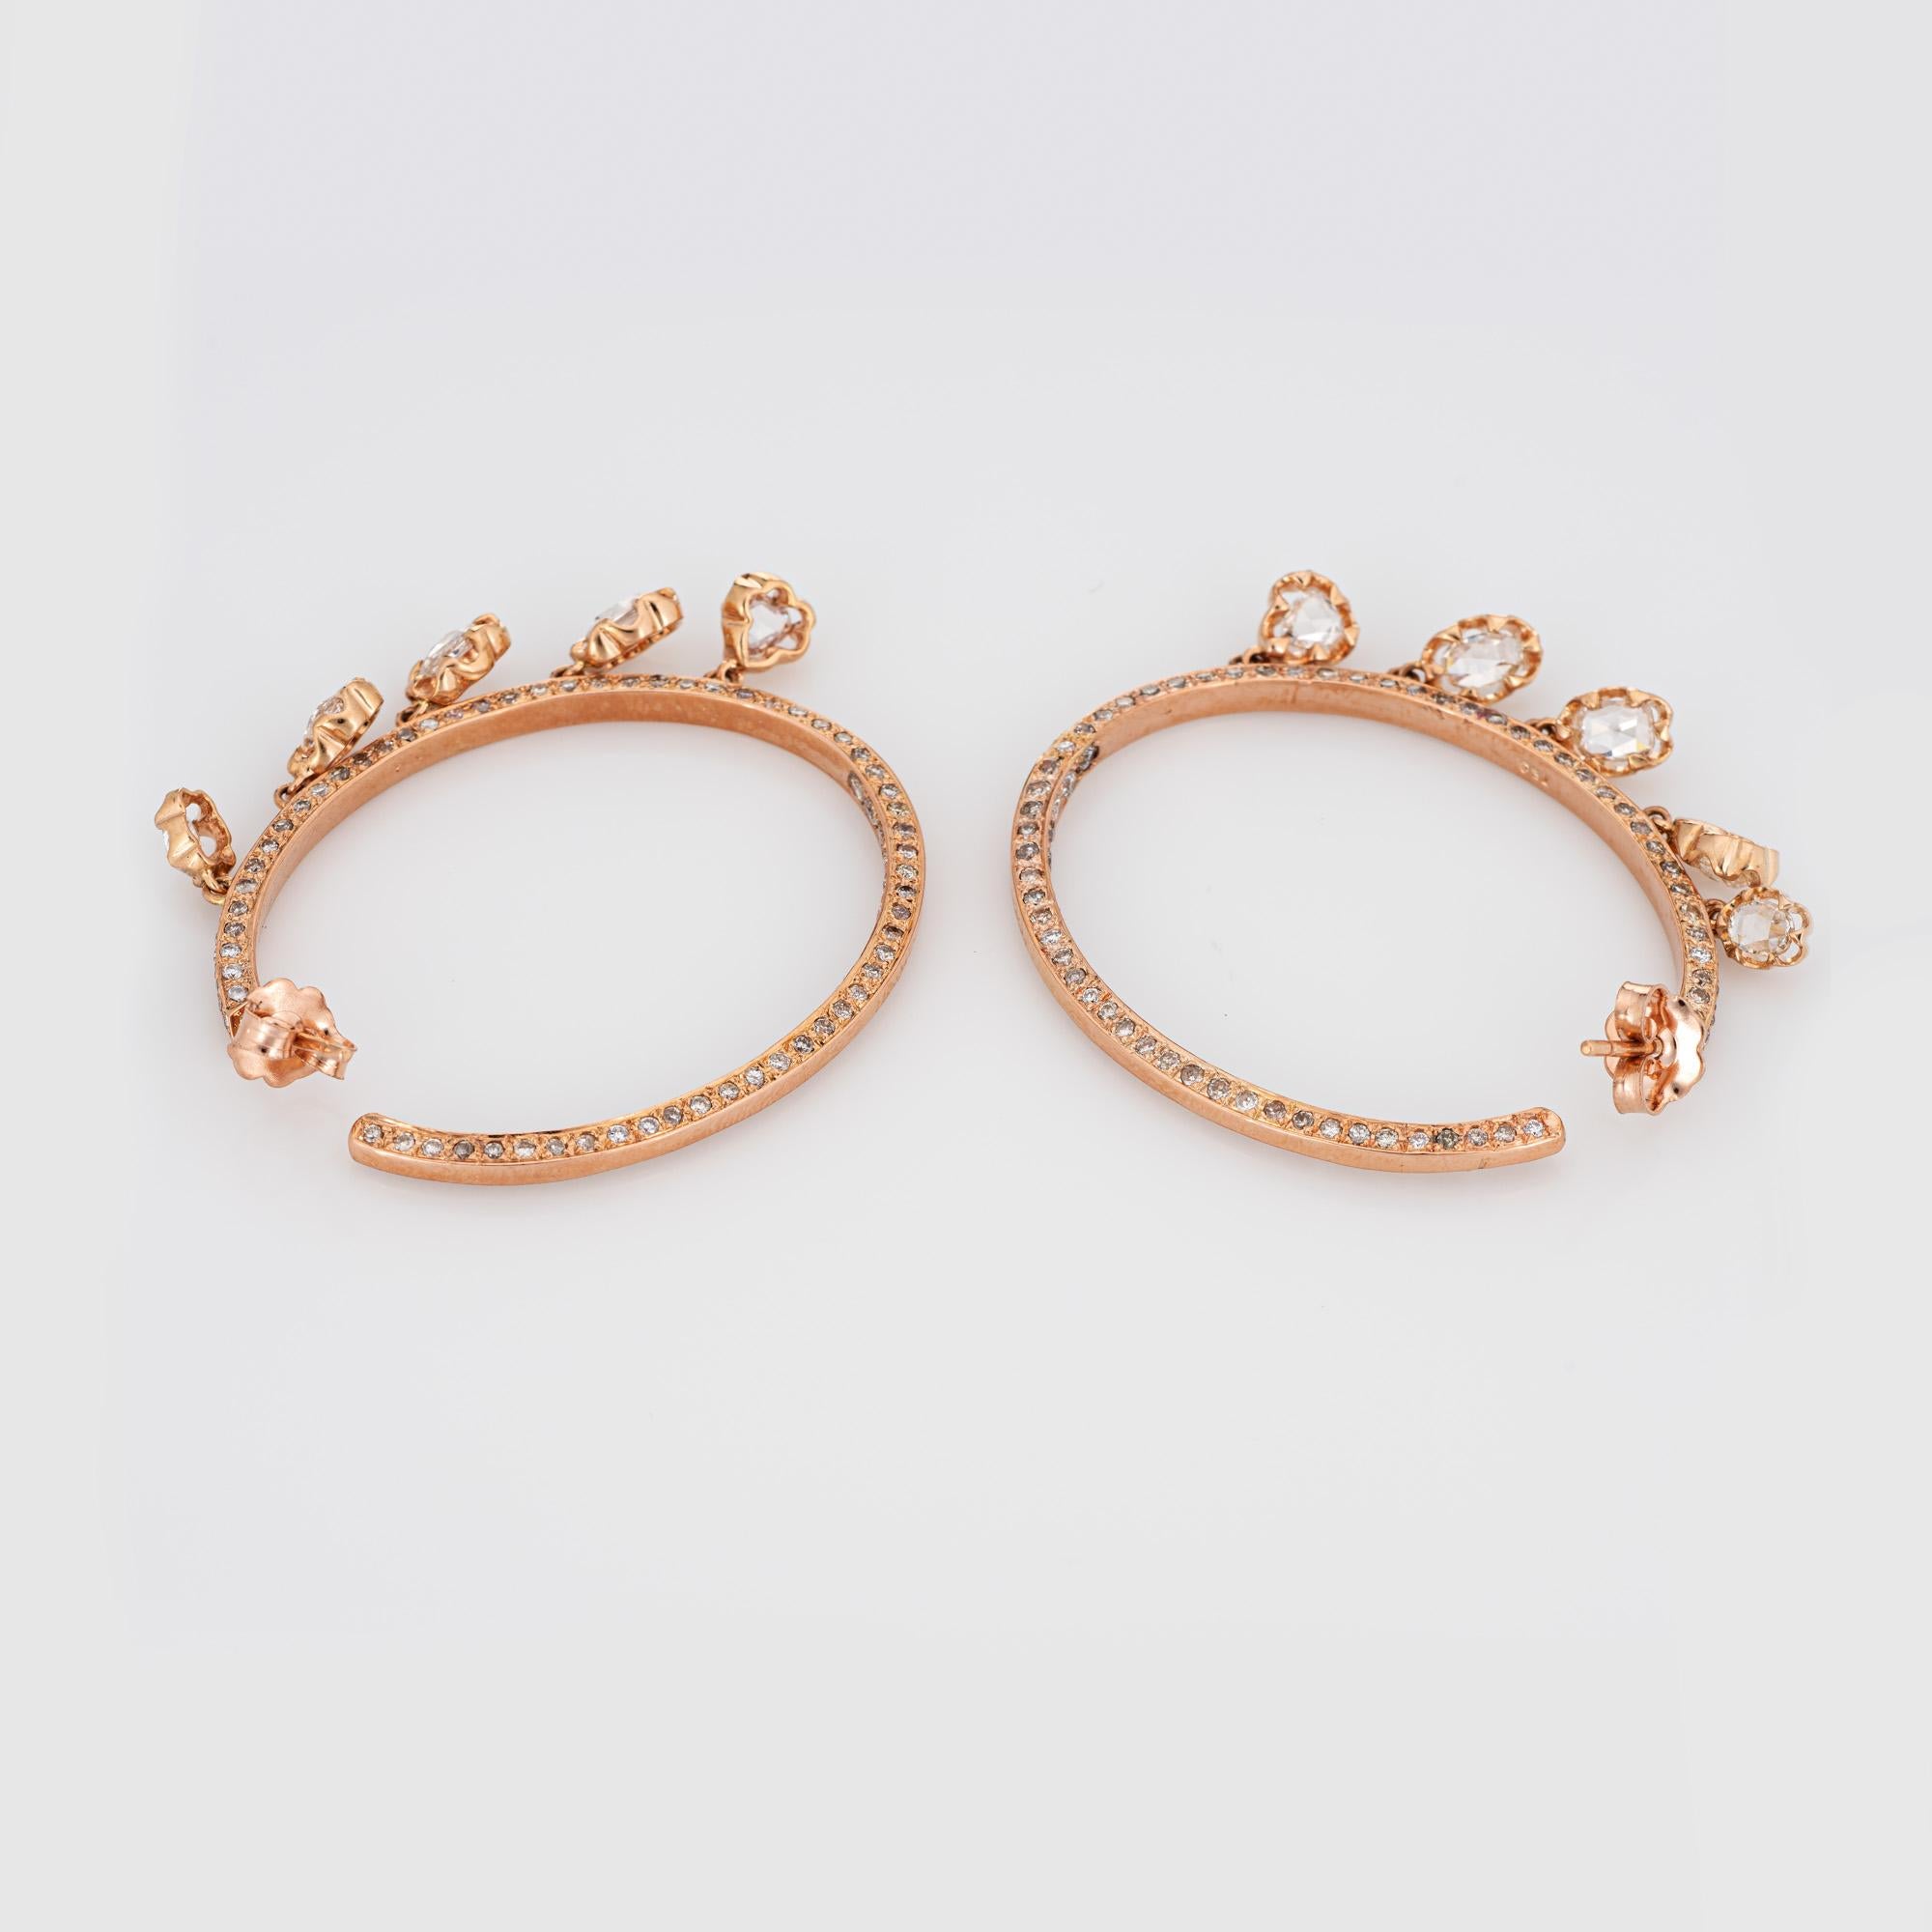 Stylish pair of fringe hoop earrings crafted in 18k rose gold (circa 2000s). 

Rose cut & round brilliant cut diamonds total an estimated 1.50 carats (estimated at I-J color and SI2-I2 clarity). 

The striking hoop earrings are set with a fringe of